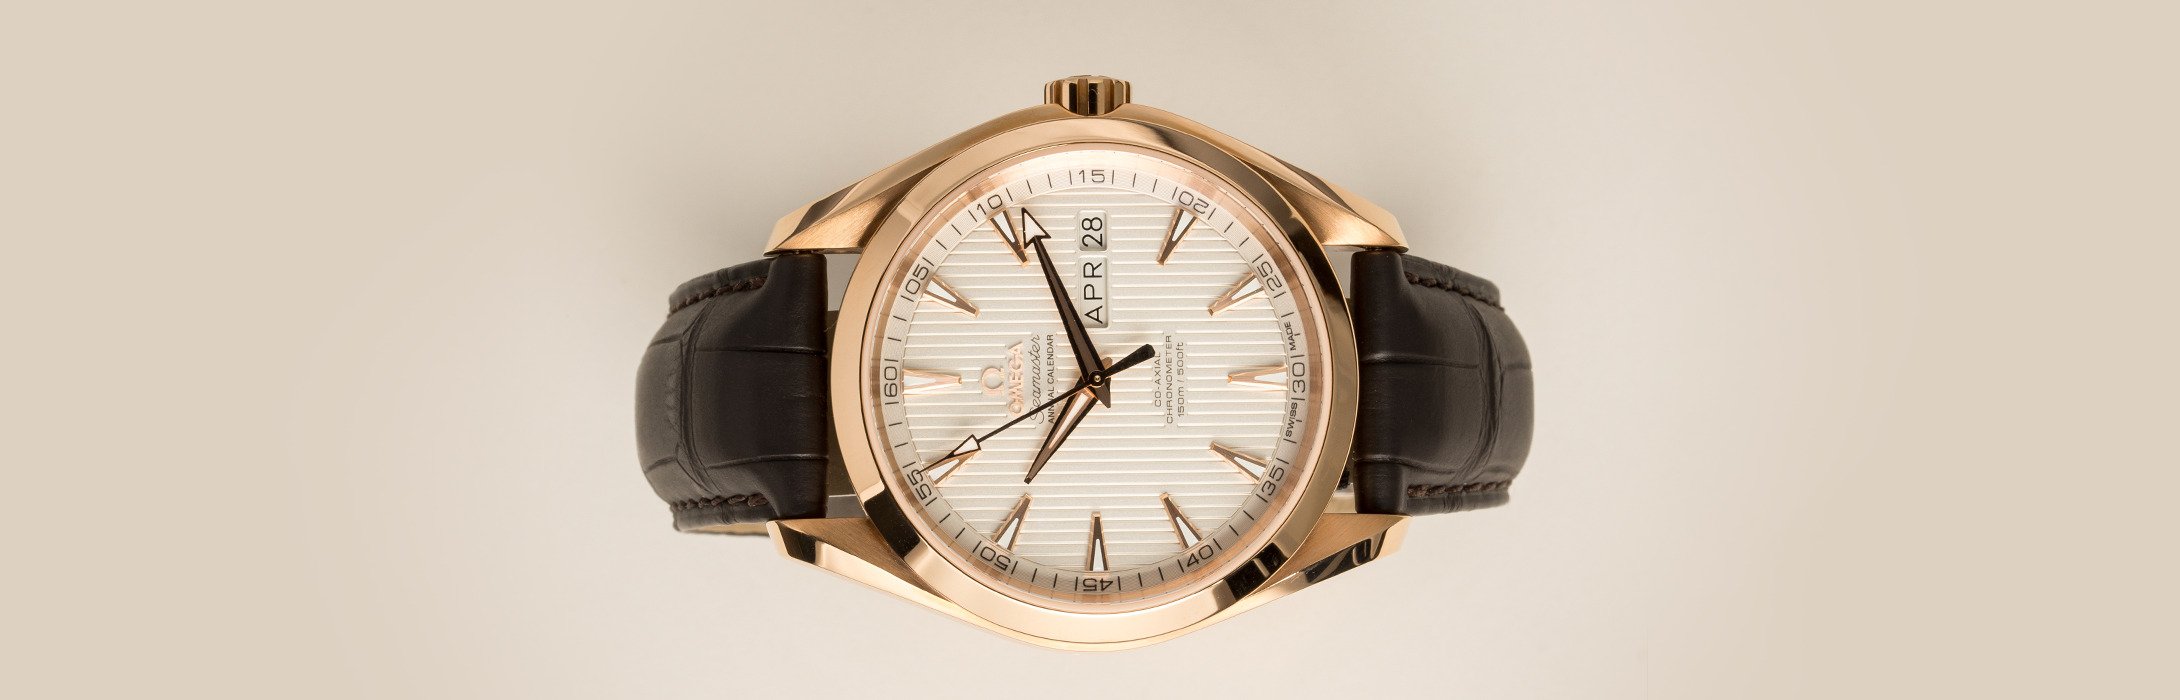 Buy Omega Watches Online In India - Zimson Watches – Zimson Watch Store-hkpdtq2012.edu.vn